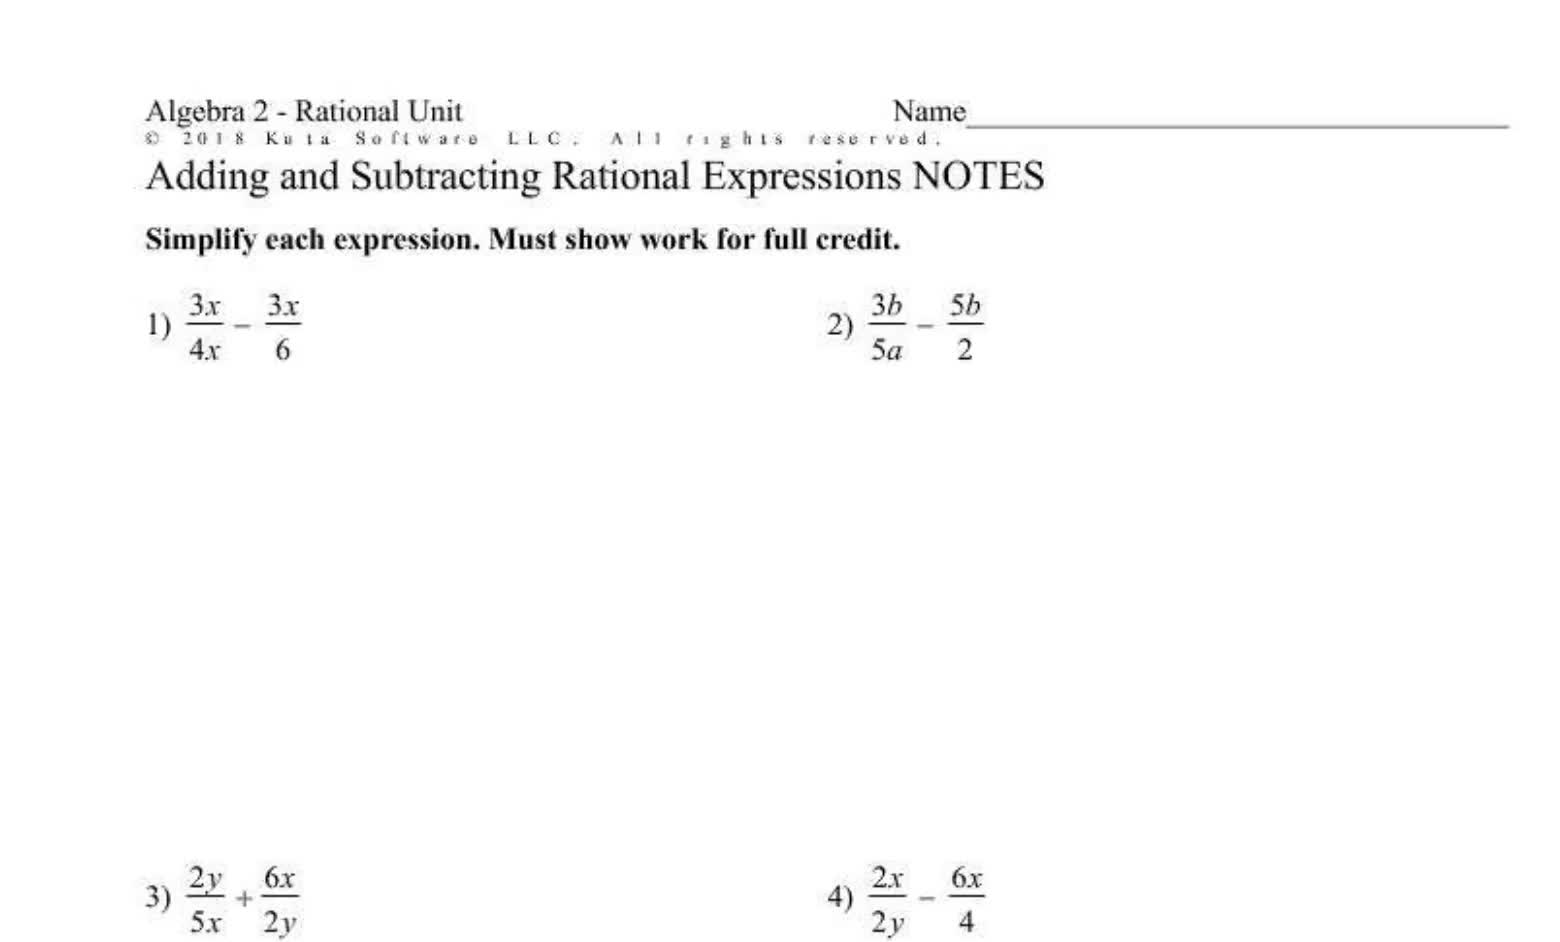 Add and Subtracting Rational Expressions (Seniors)